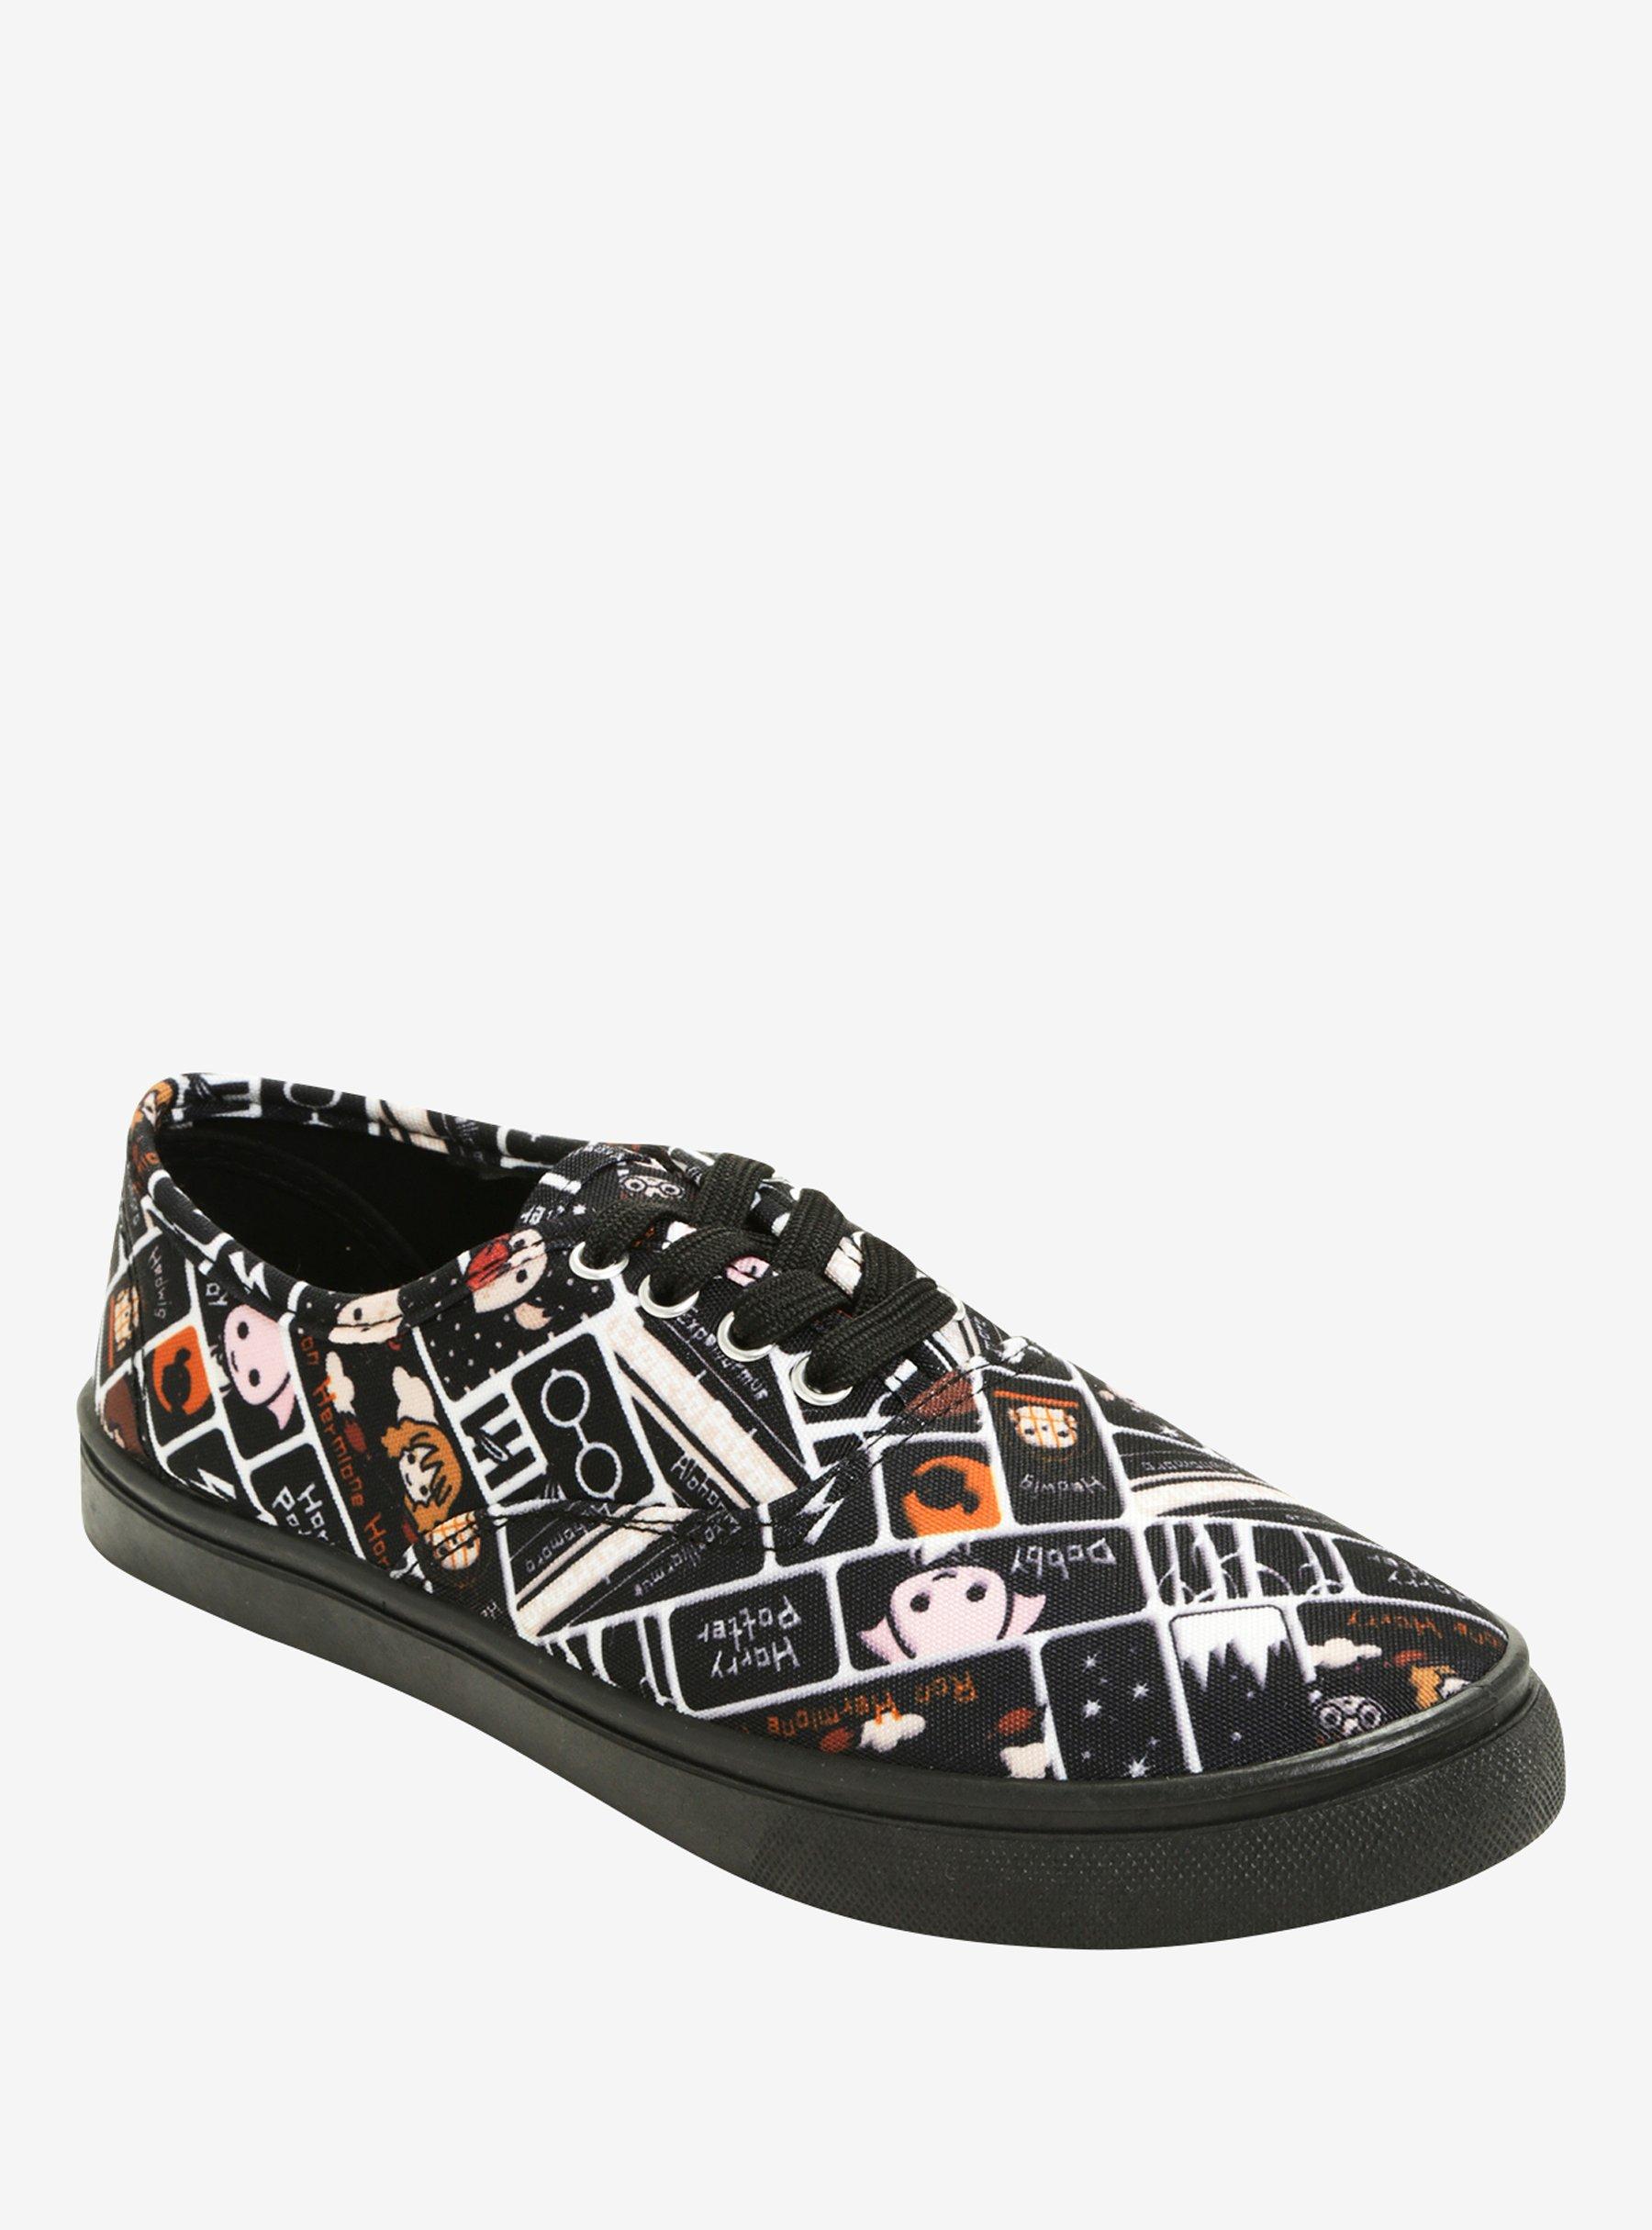 Harry Potter Chibi Characters Lace-Up Sneakers | Hot Topic